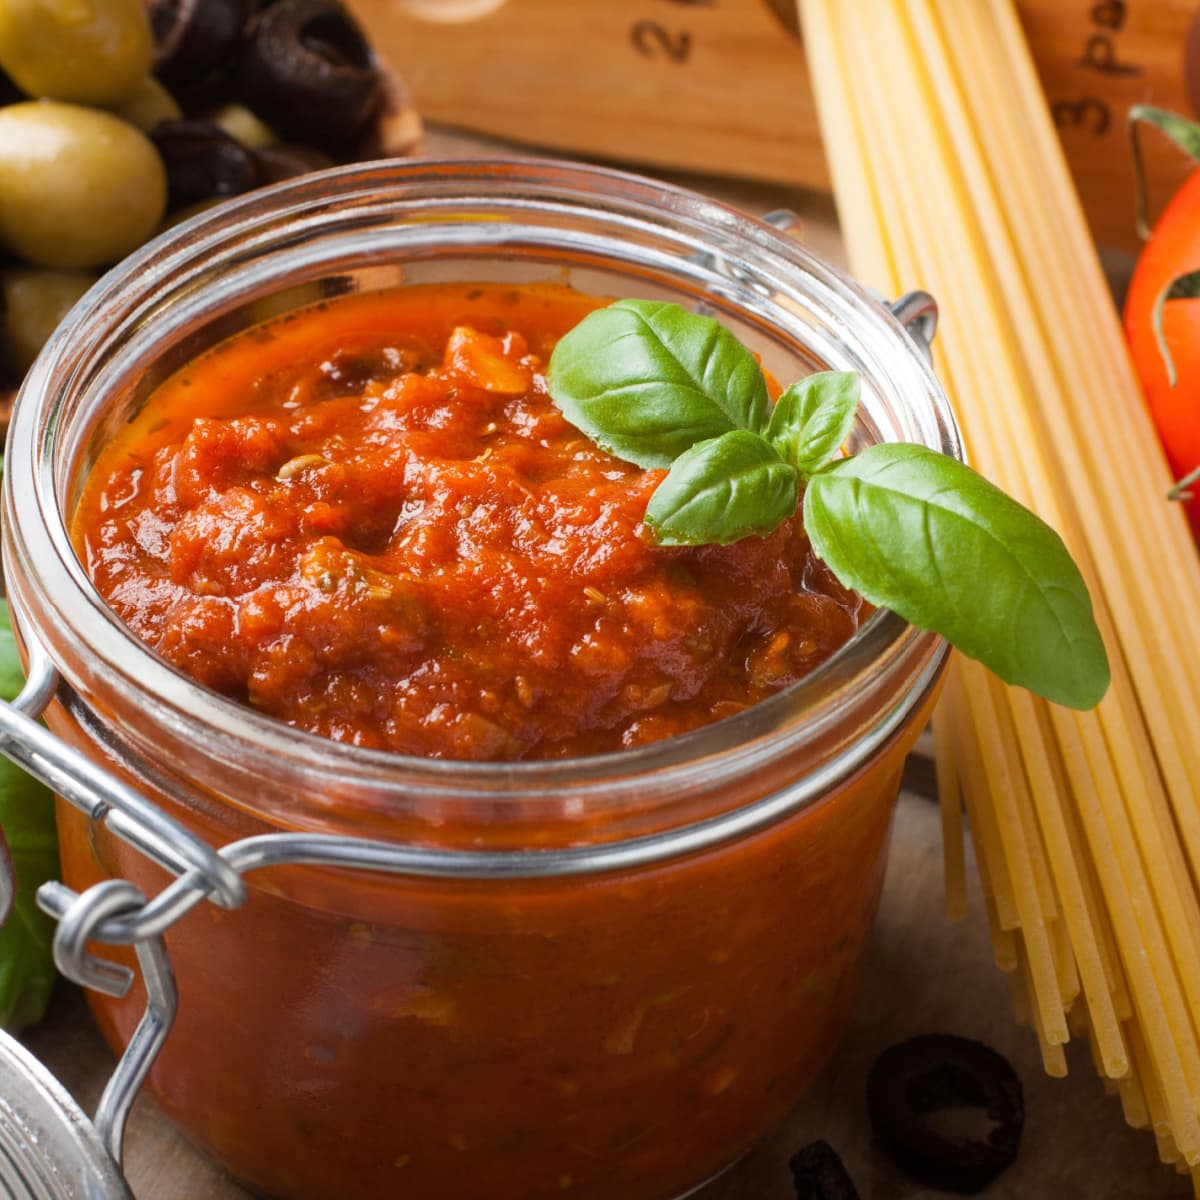 Homemade Pasta Sauce in a Jar with Raw Pasta on the Side